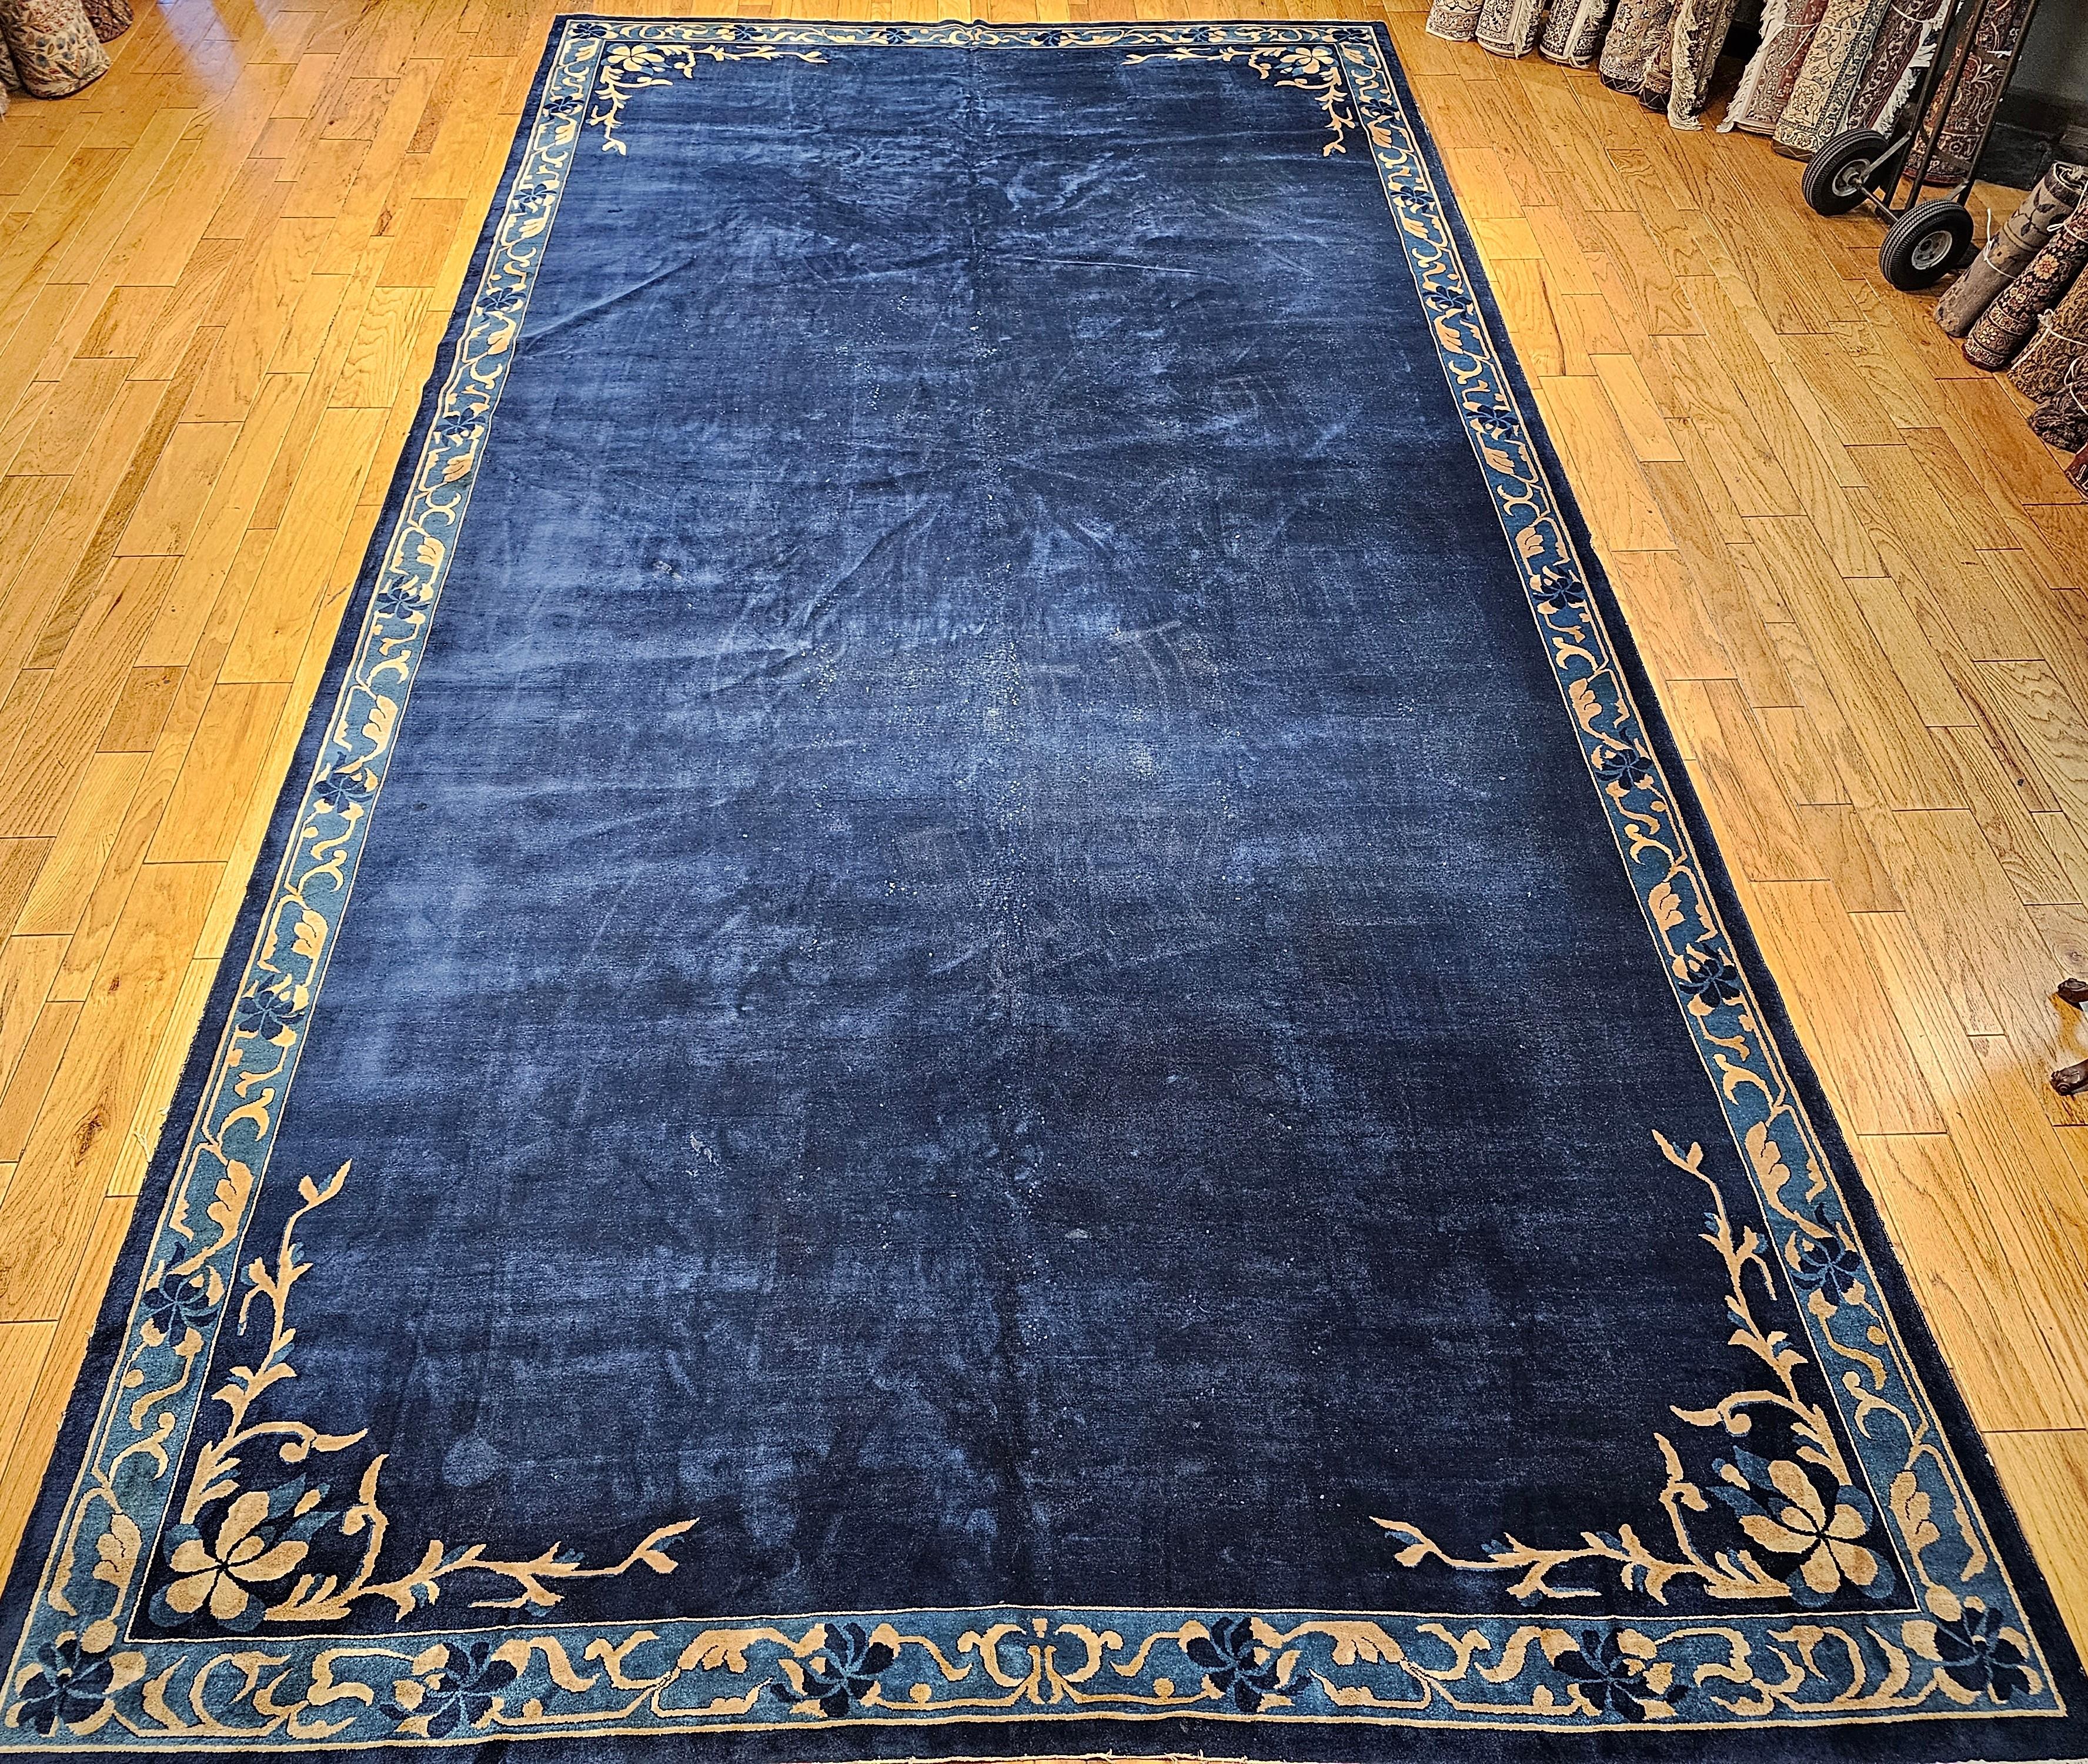 Simple and elegant!  That is how we can best describe the oversize Art Deco Chinese rug from the 1st quarter of the 20th century in an open field design. The rug would bring in elegance through its understatement. The dark blue field is framed by a